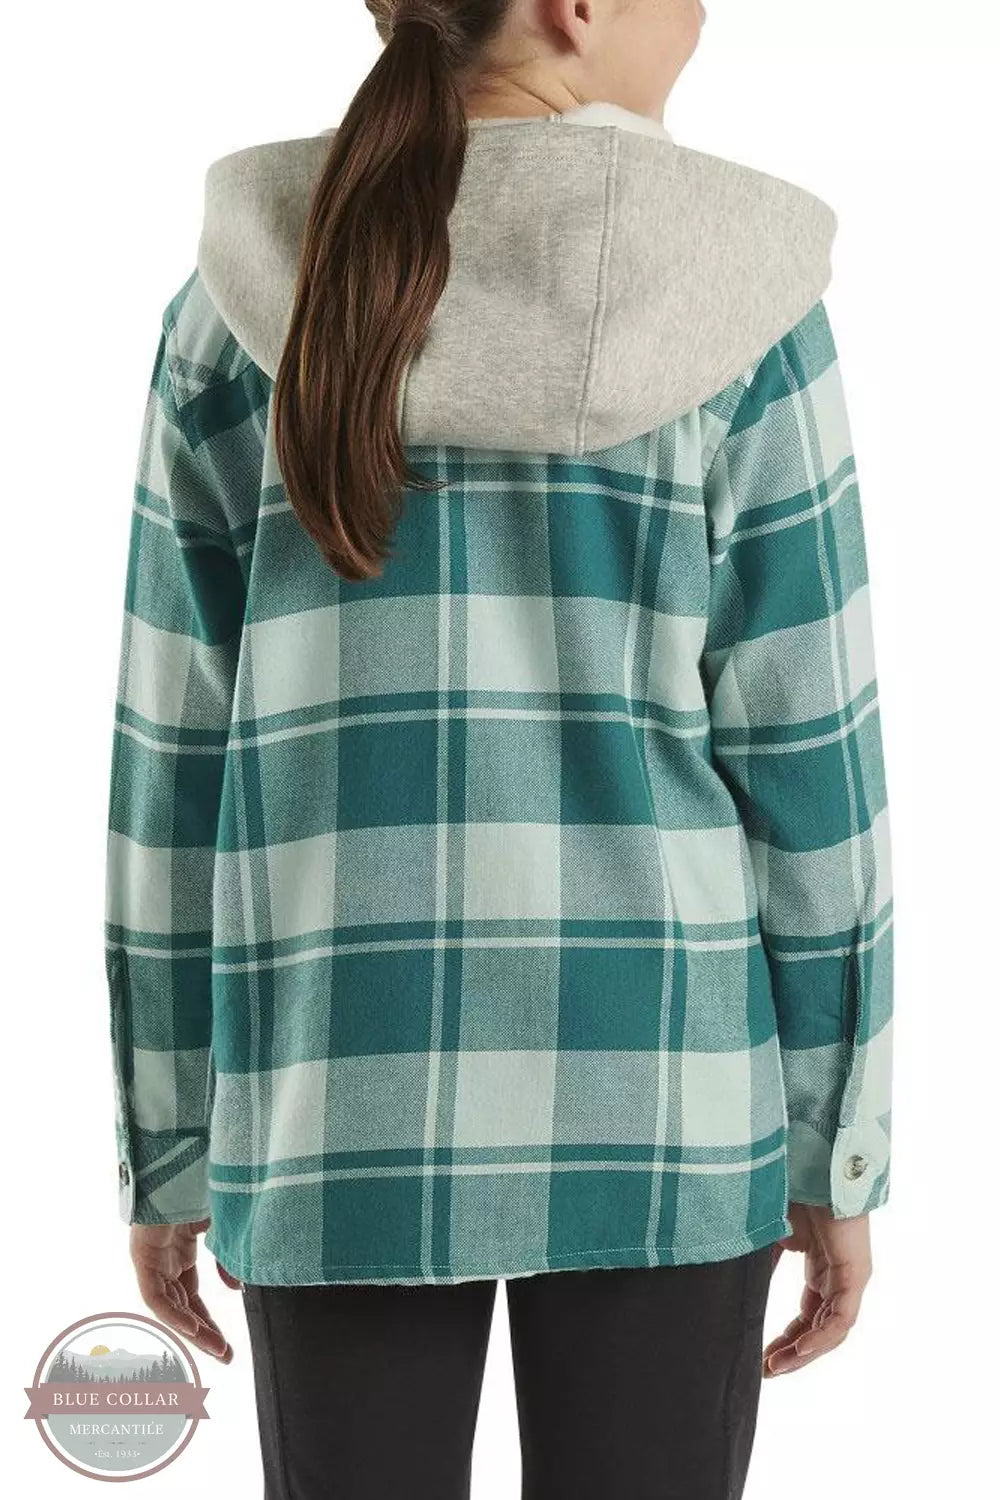 Carhartt CE9148-A180 Long Sleeve Flannel Button Front Hooded Shirt in Pastel Turquoise Back View